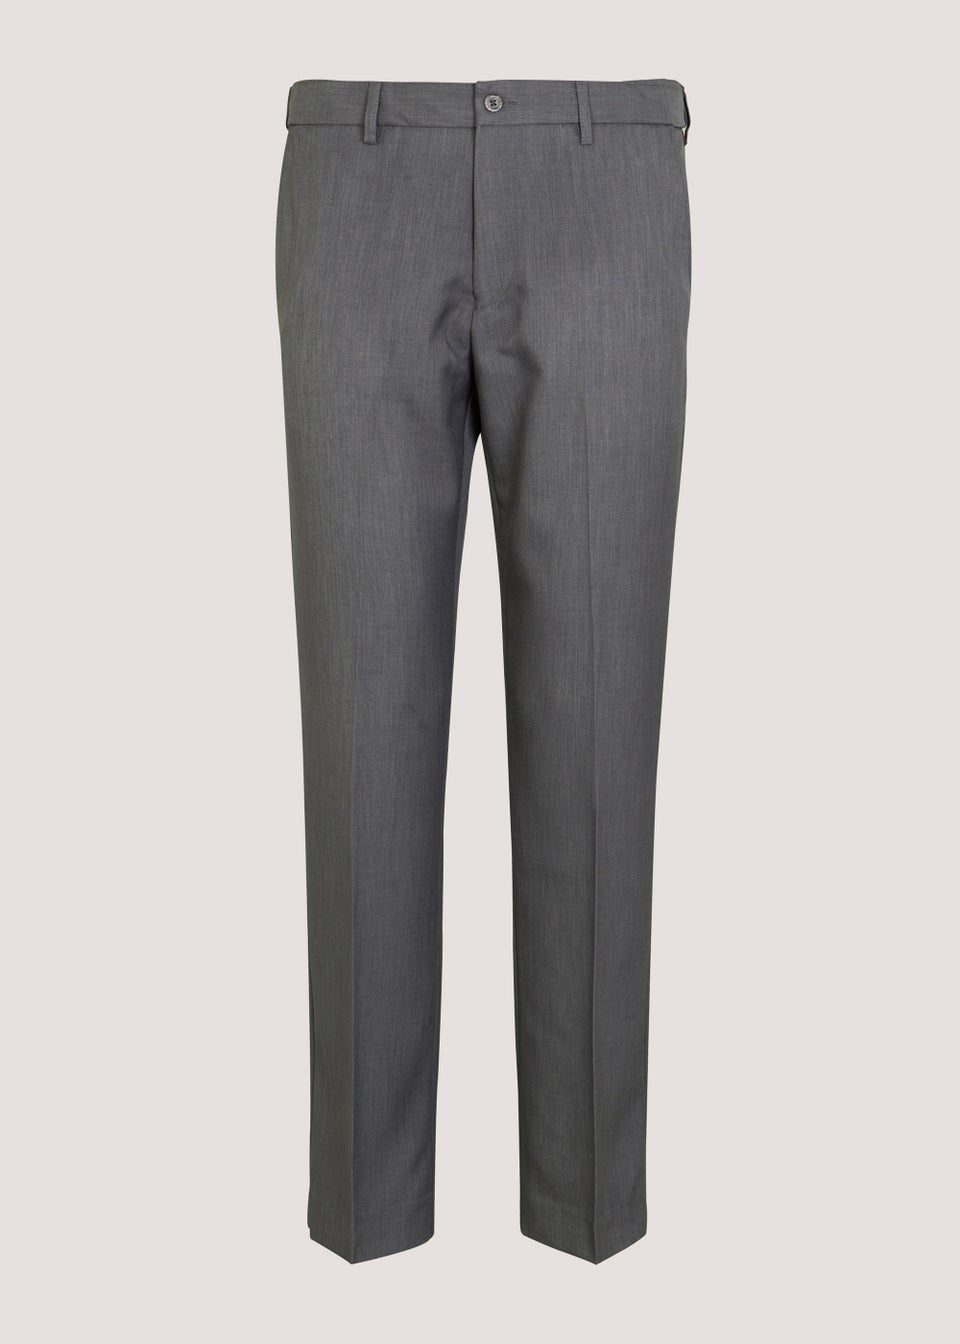 Farah Pleat Front Polyester Dress Pant  Stanleys Menswear  mens  clothing store